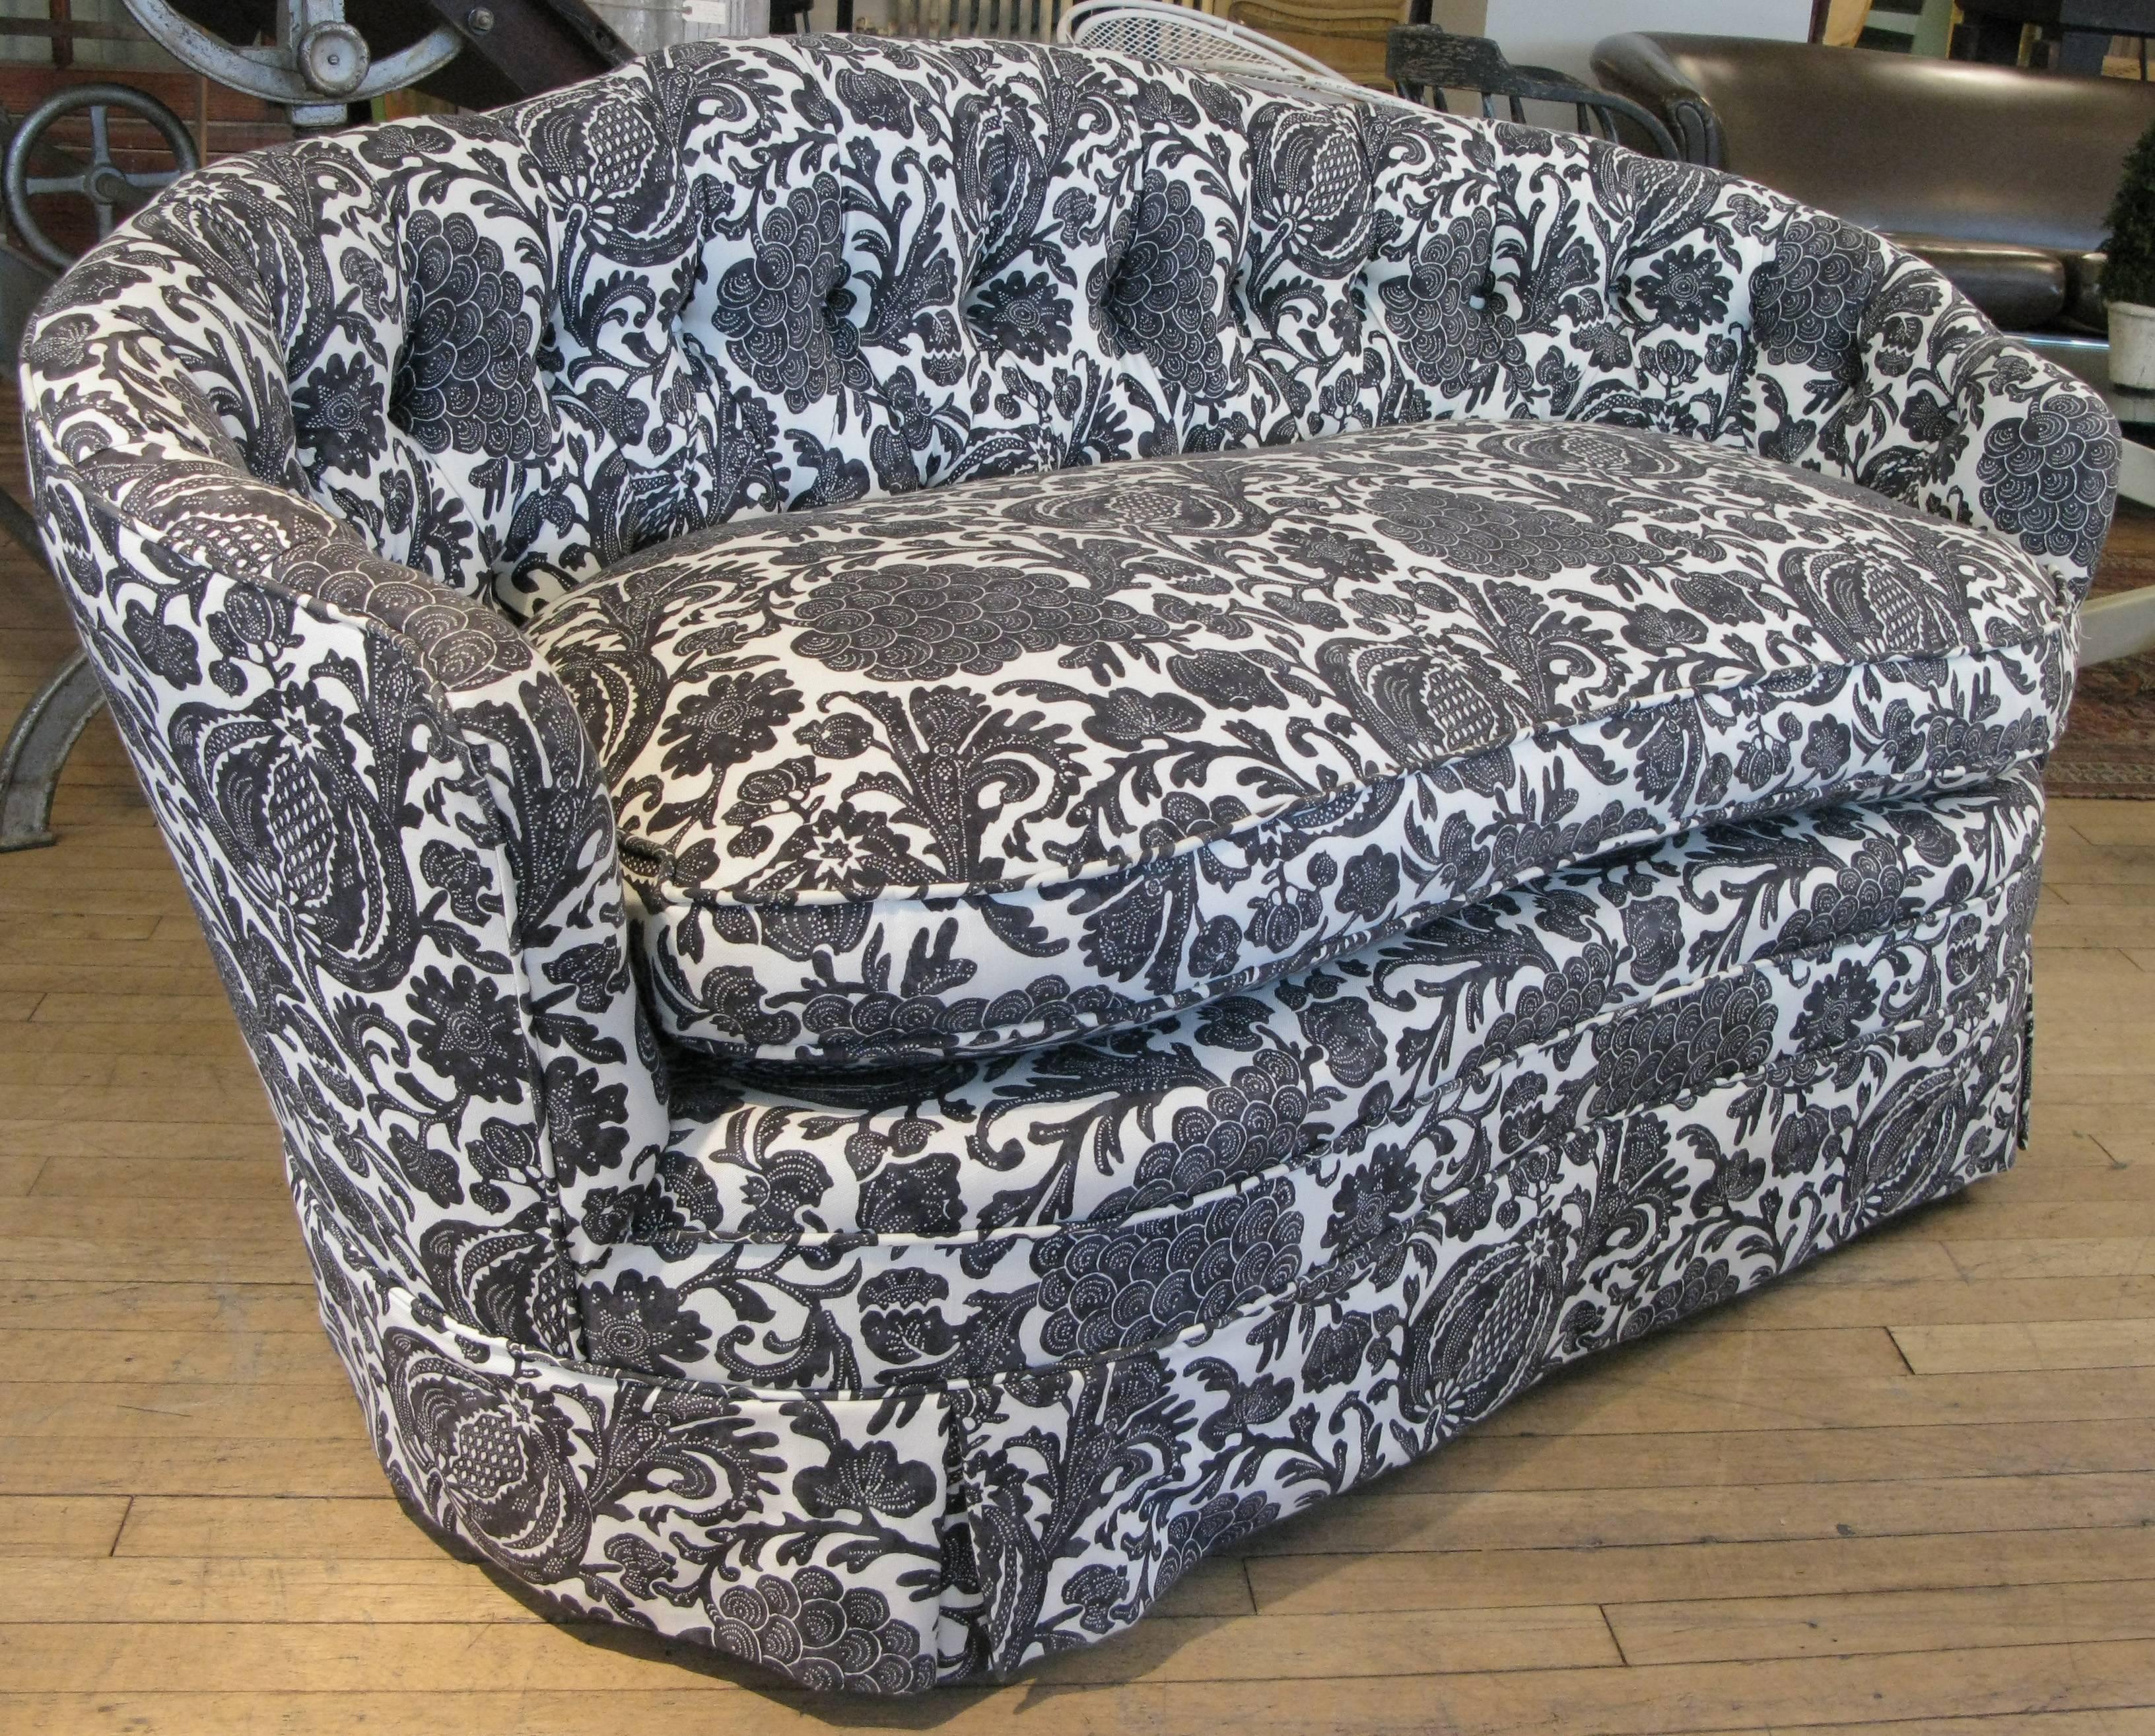 A very nice curved back settee with fully button tufted back and a large down seat cushion. in its original black and white patterned fabric, all in excellent condition.